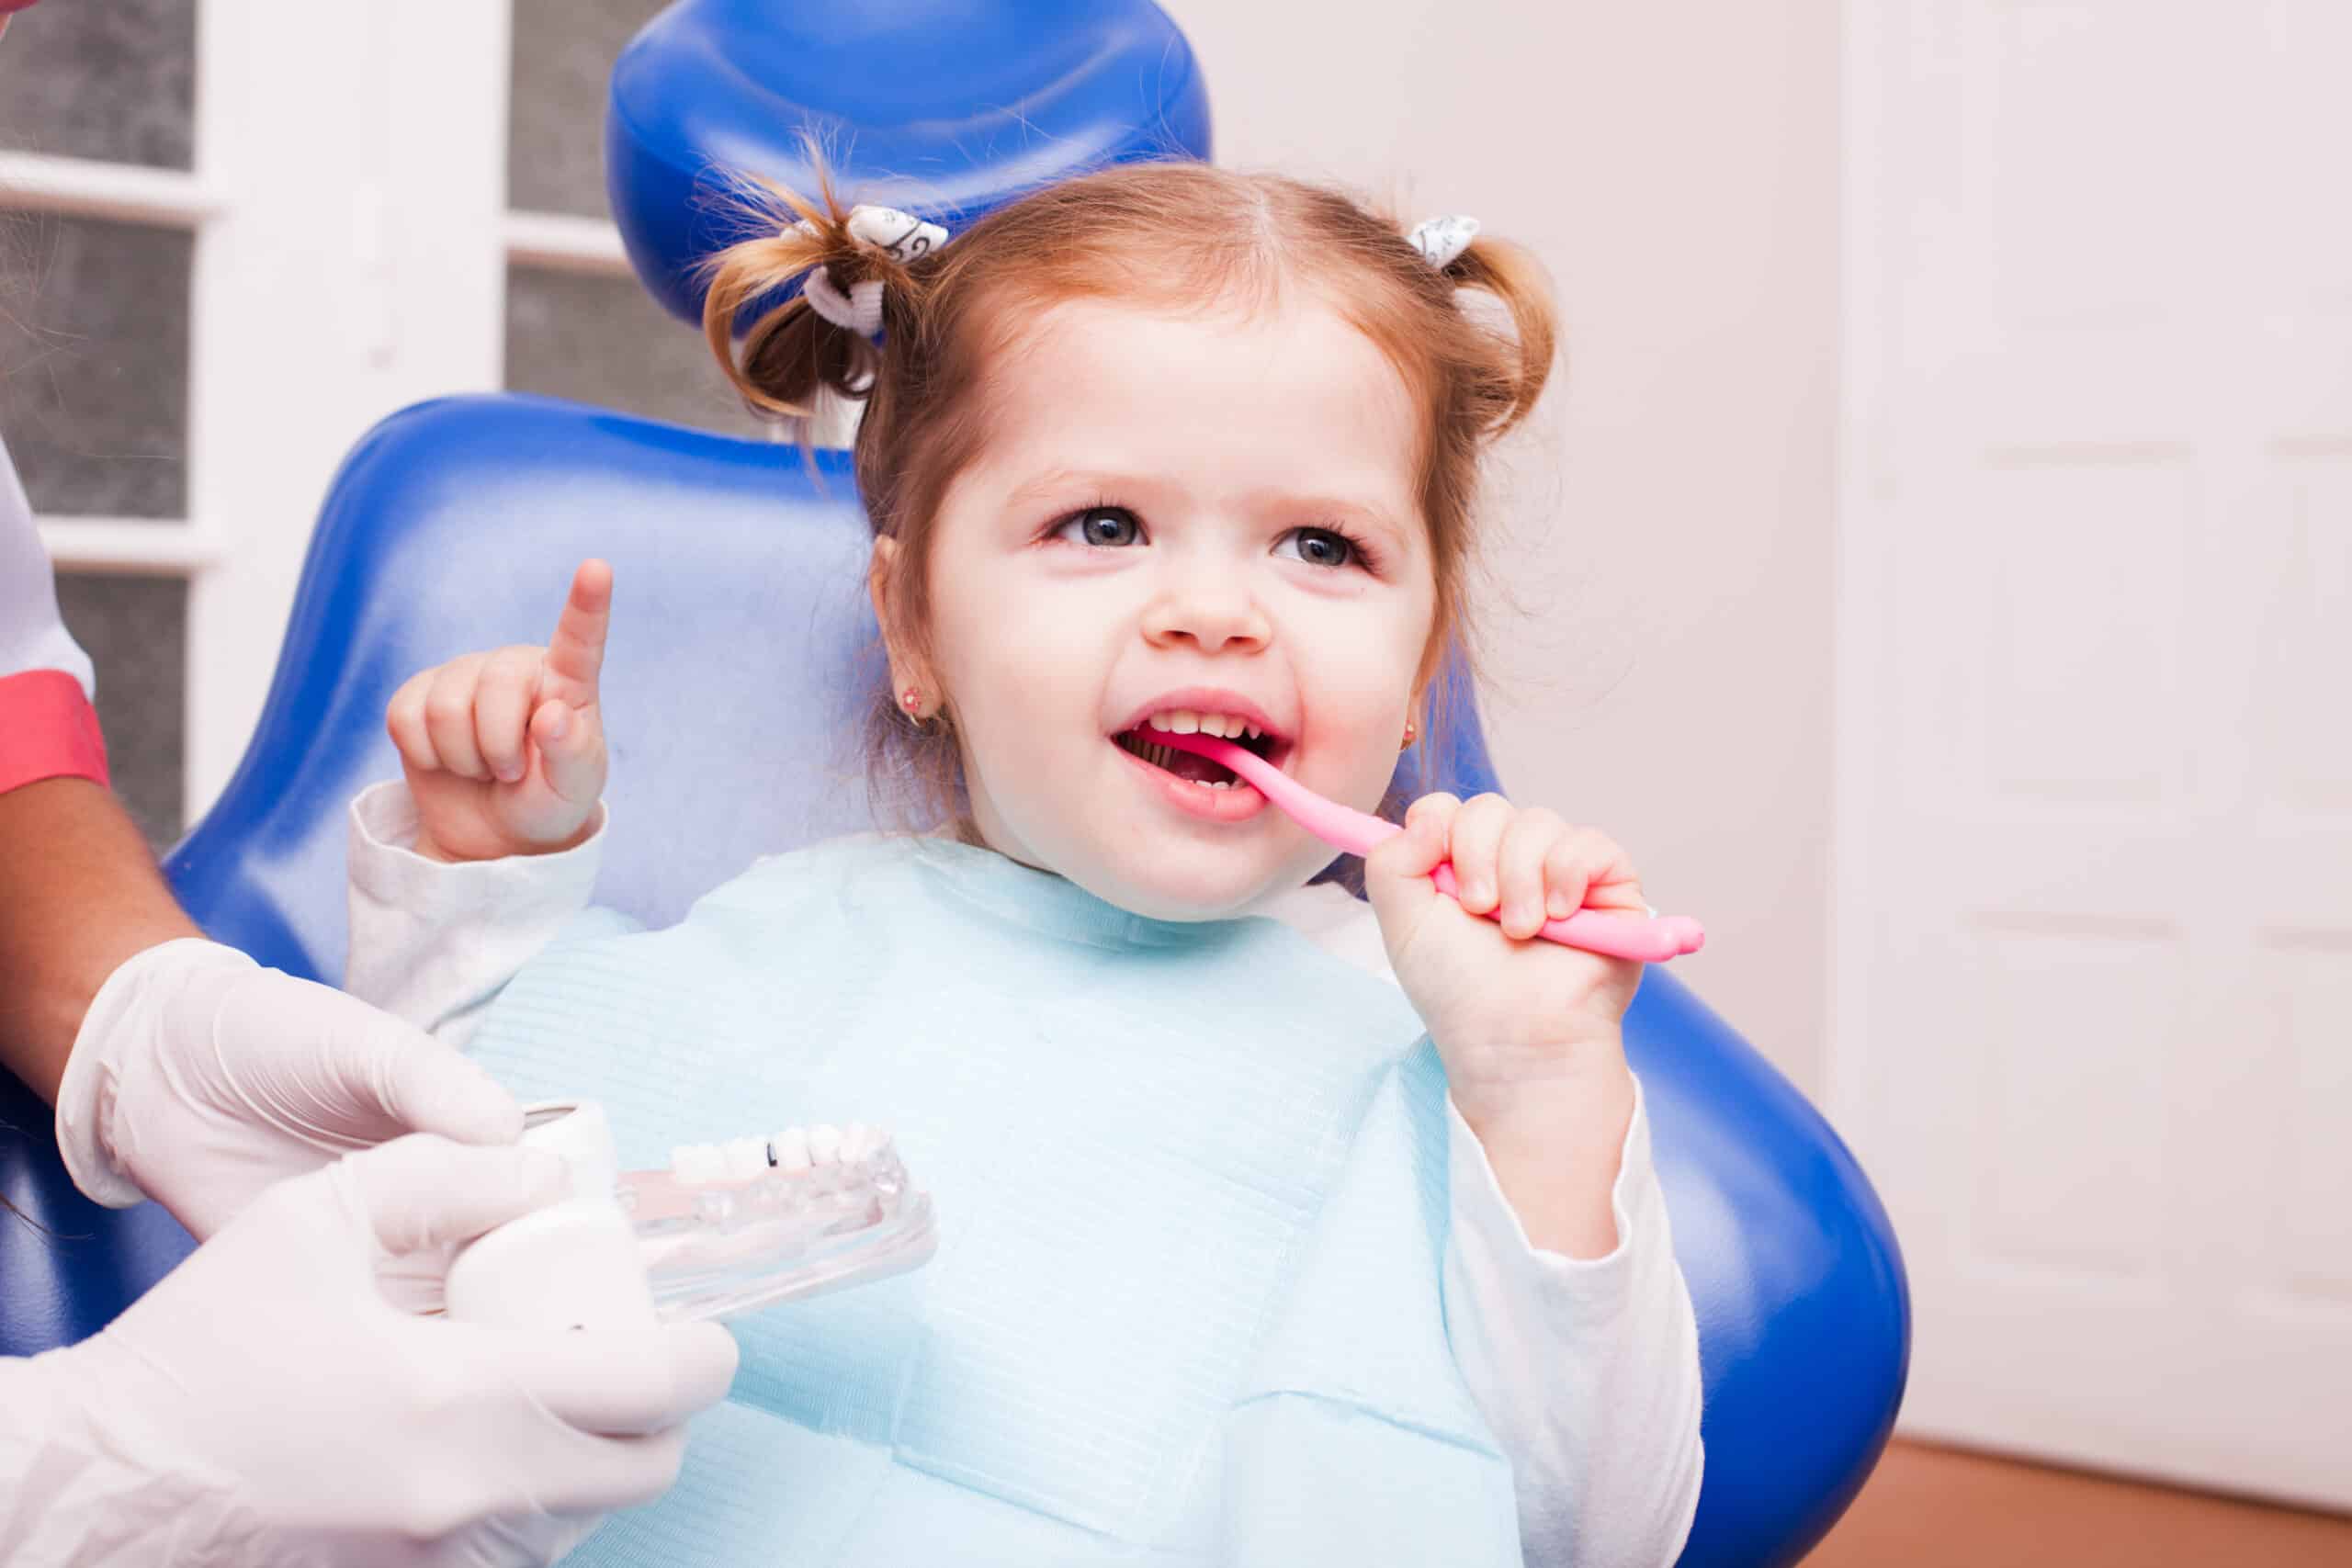 Advanced treatments to restore your child's dental health and smile with precision and empathy.